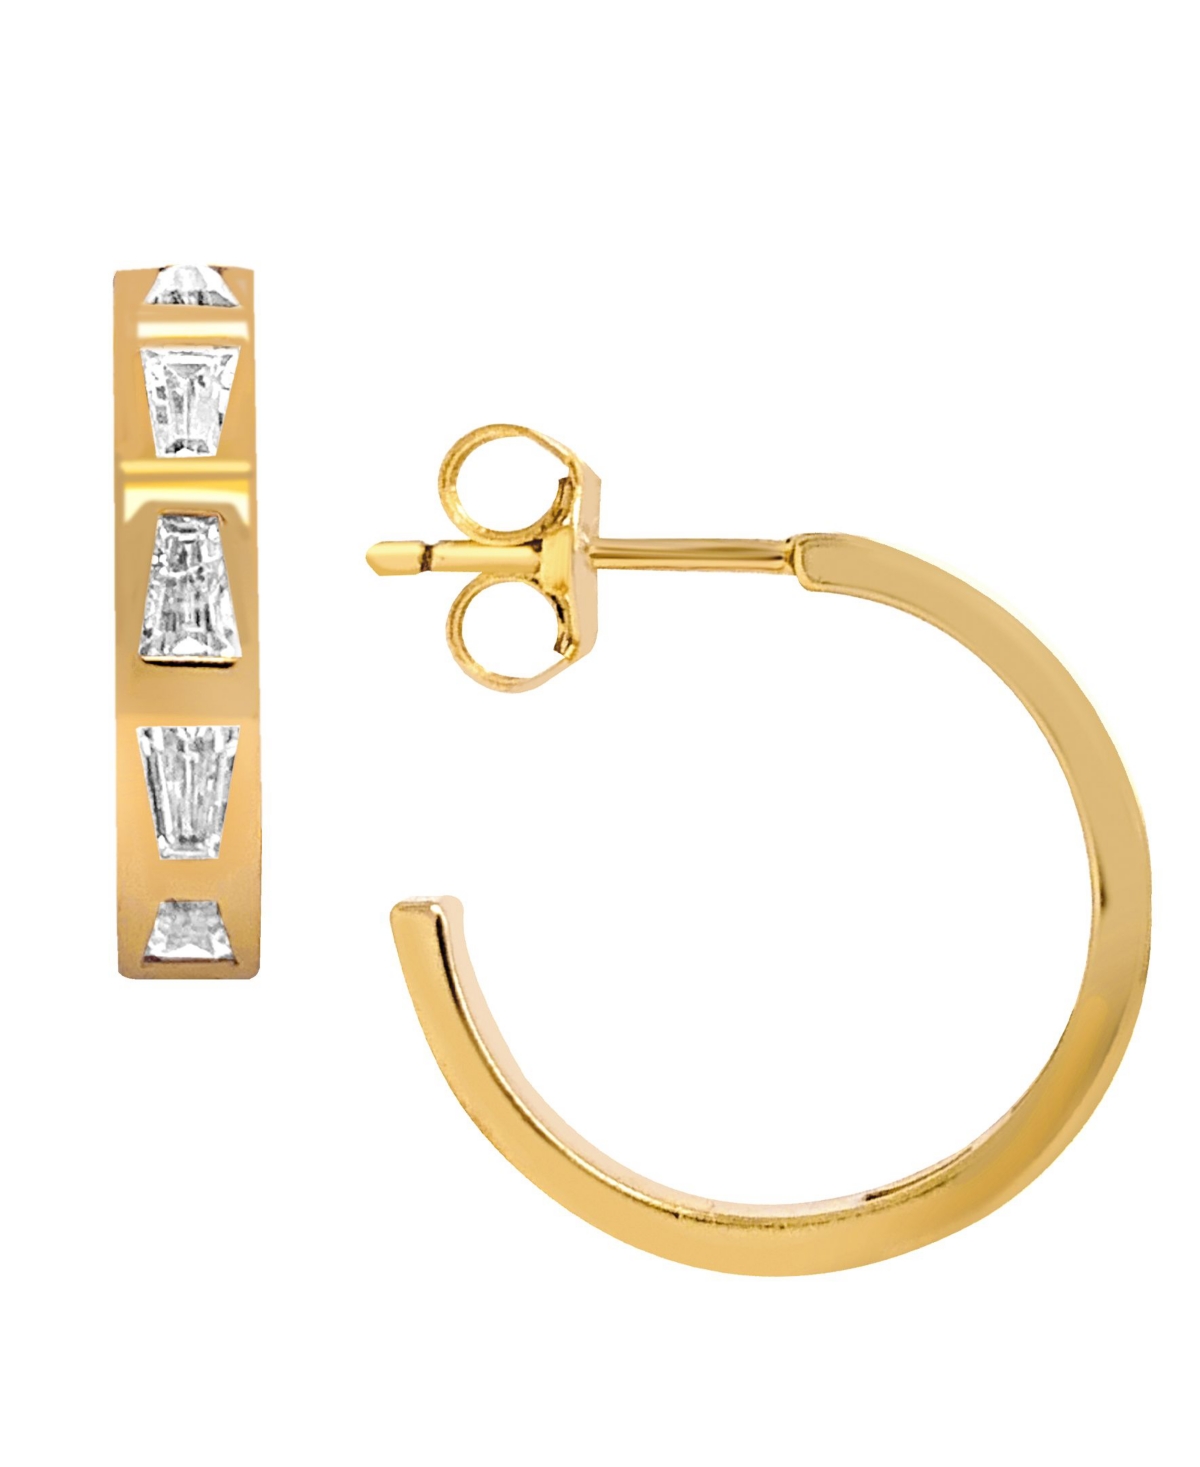 18K Gold Plated Imitation Cubic Zirconia Encrusted Hoop Earrings - Gold Plated